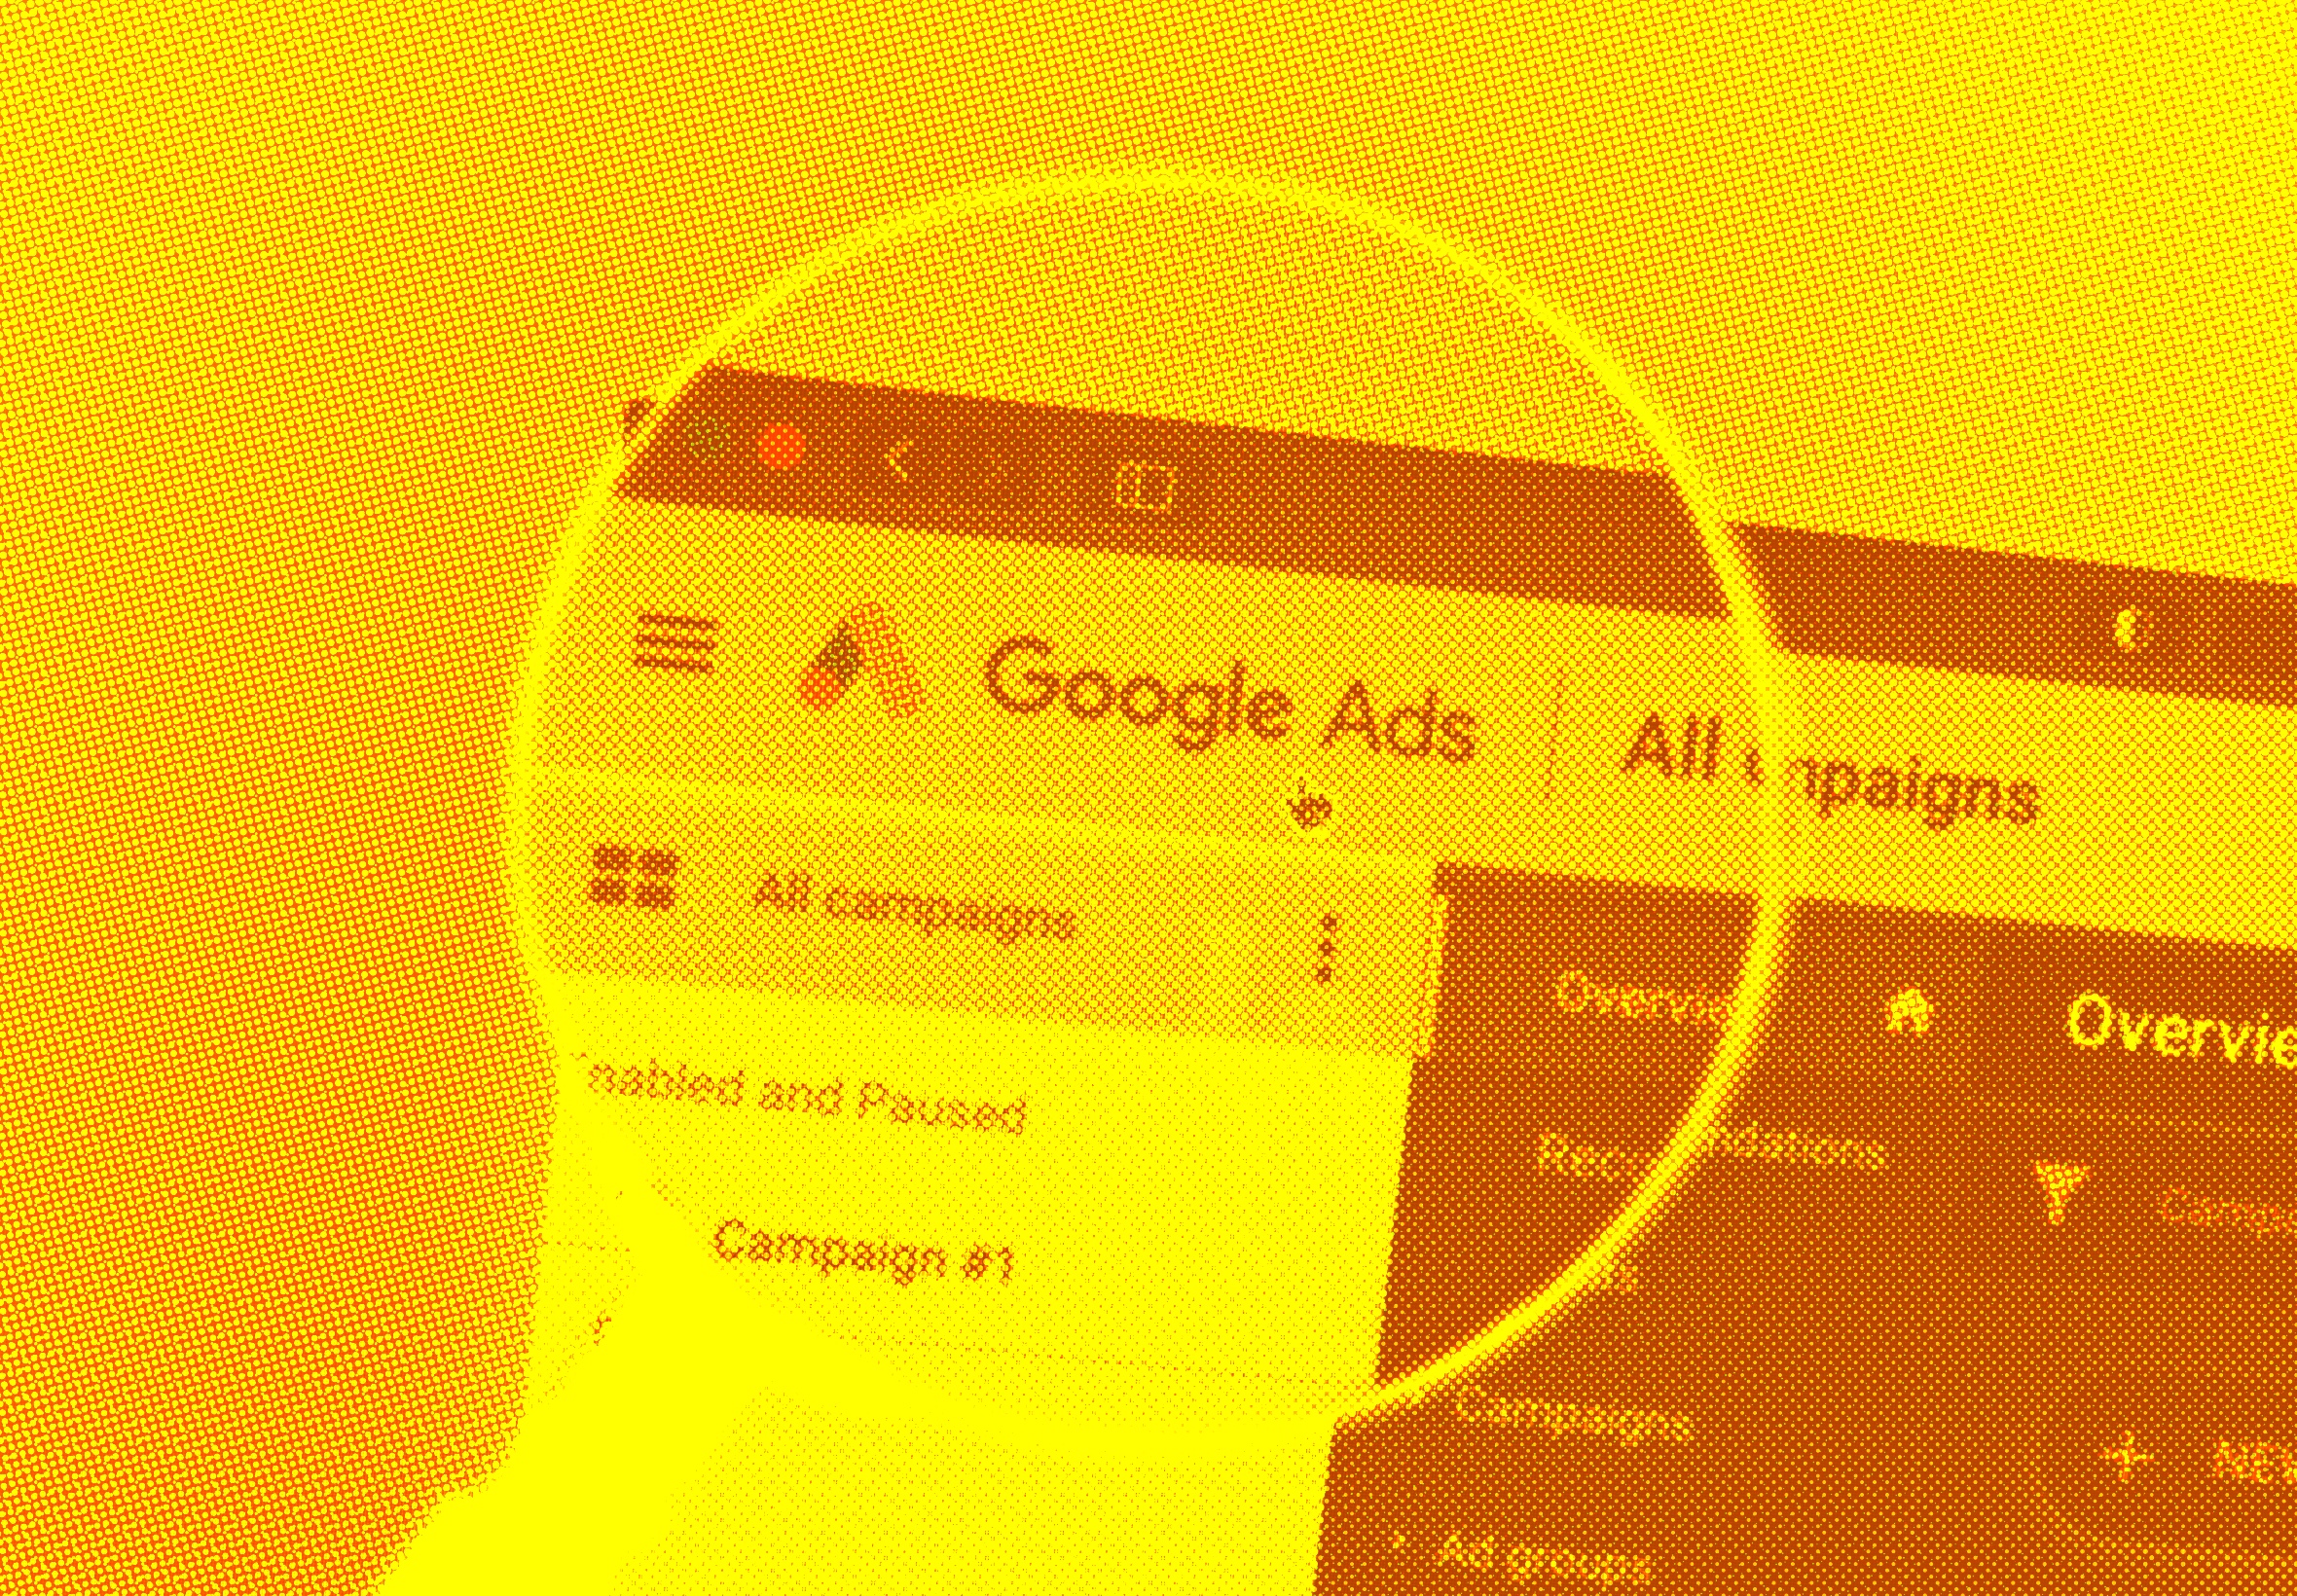 Google Ads 101: How to Create and Optimize a High-Performing Campaign